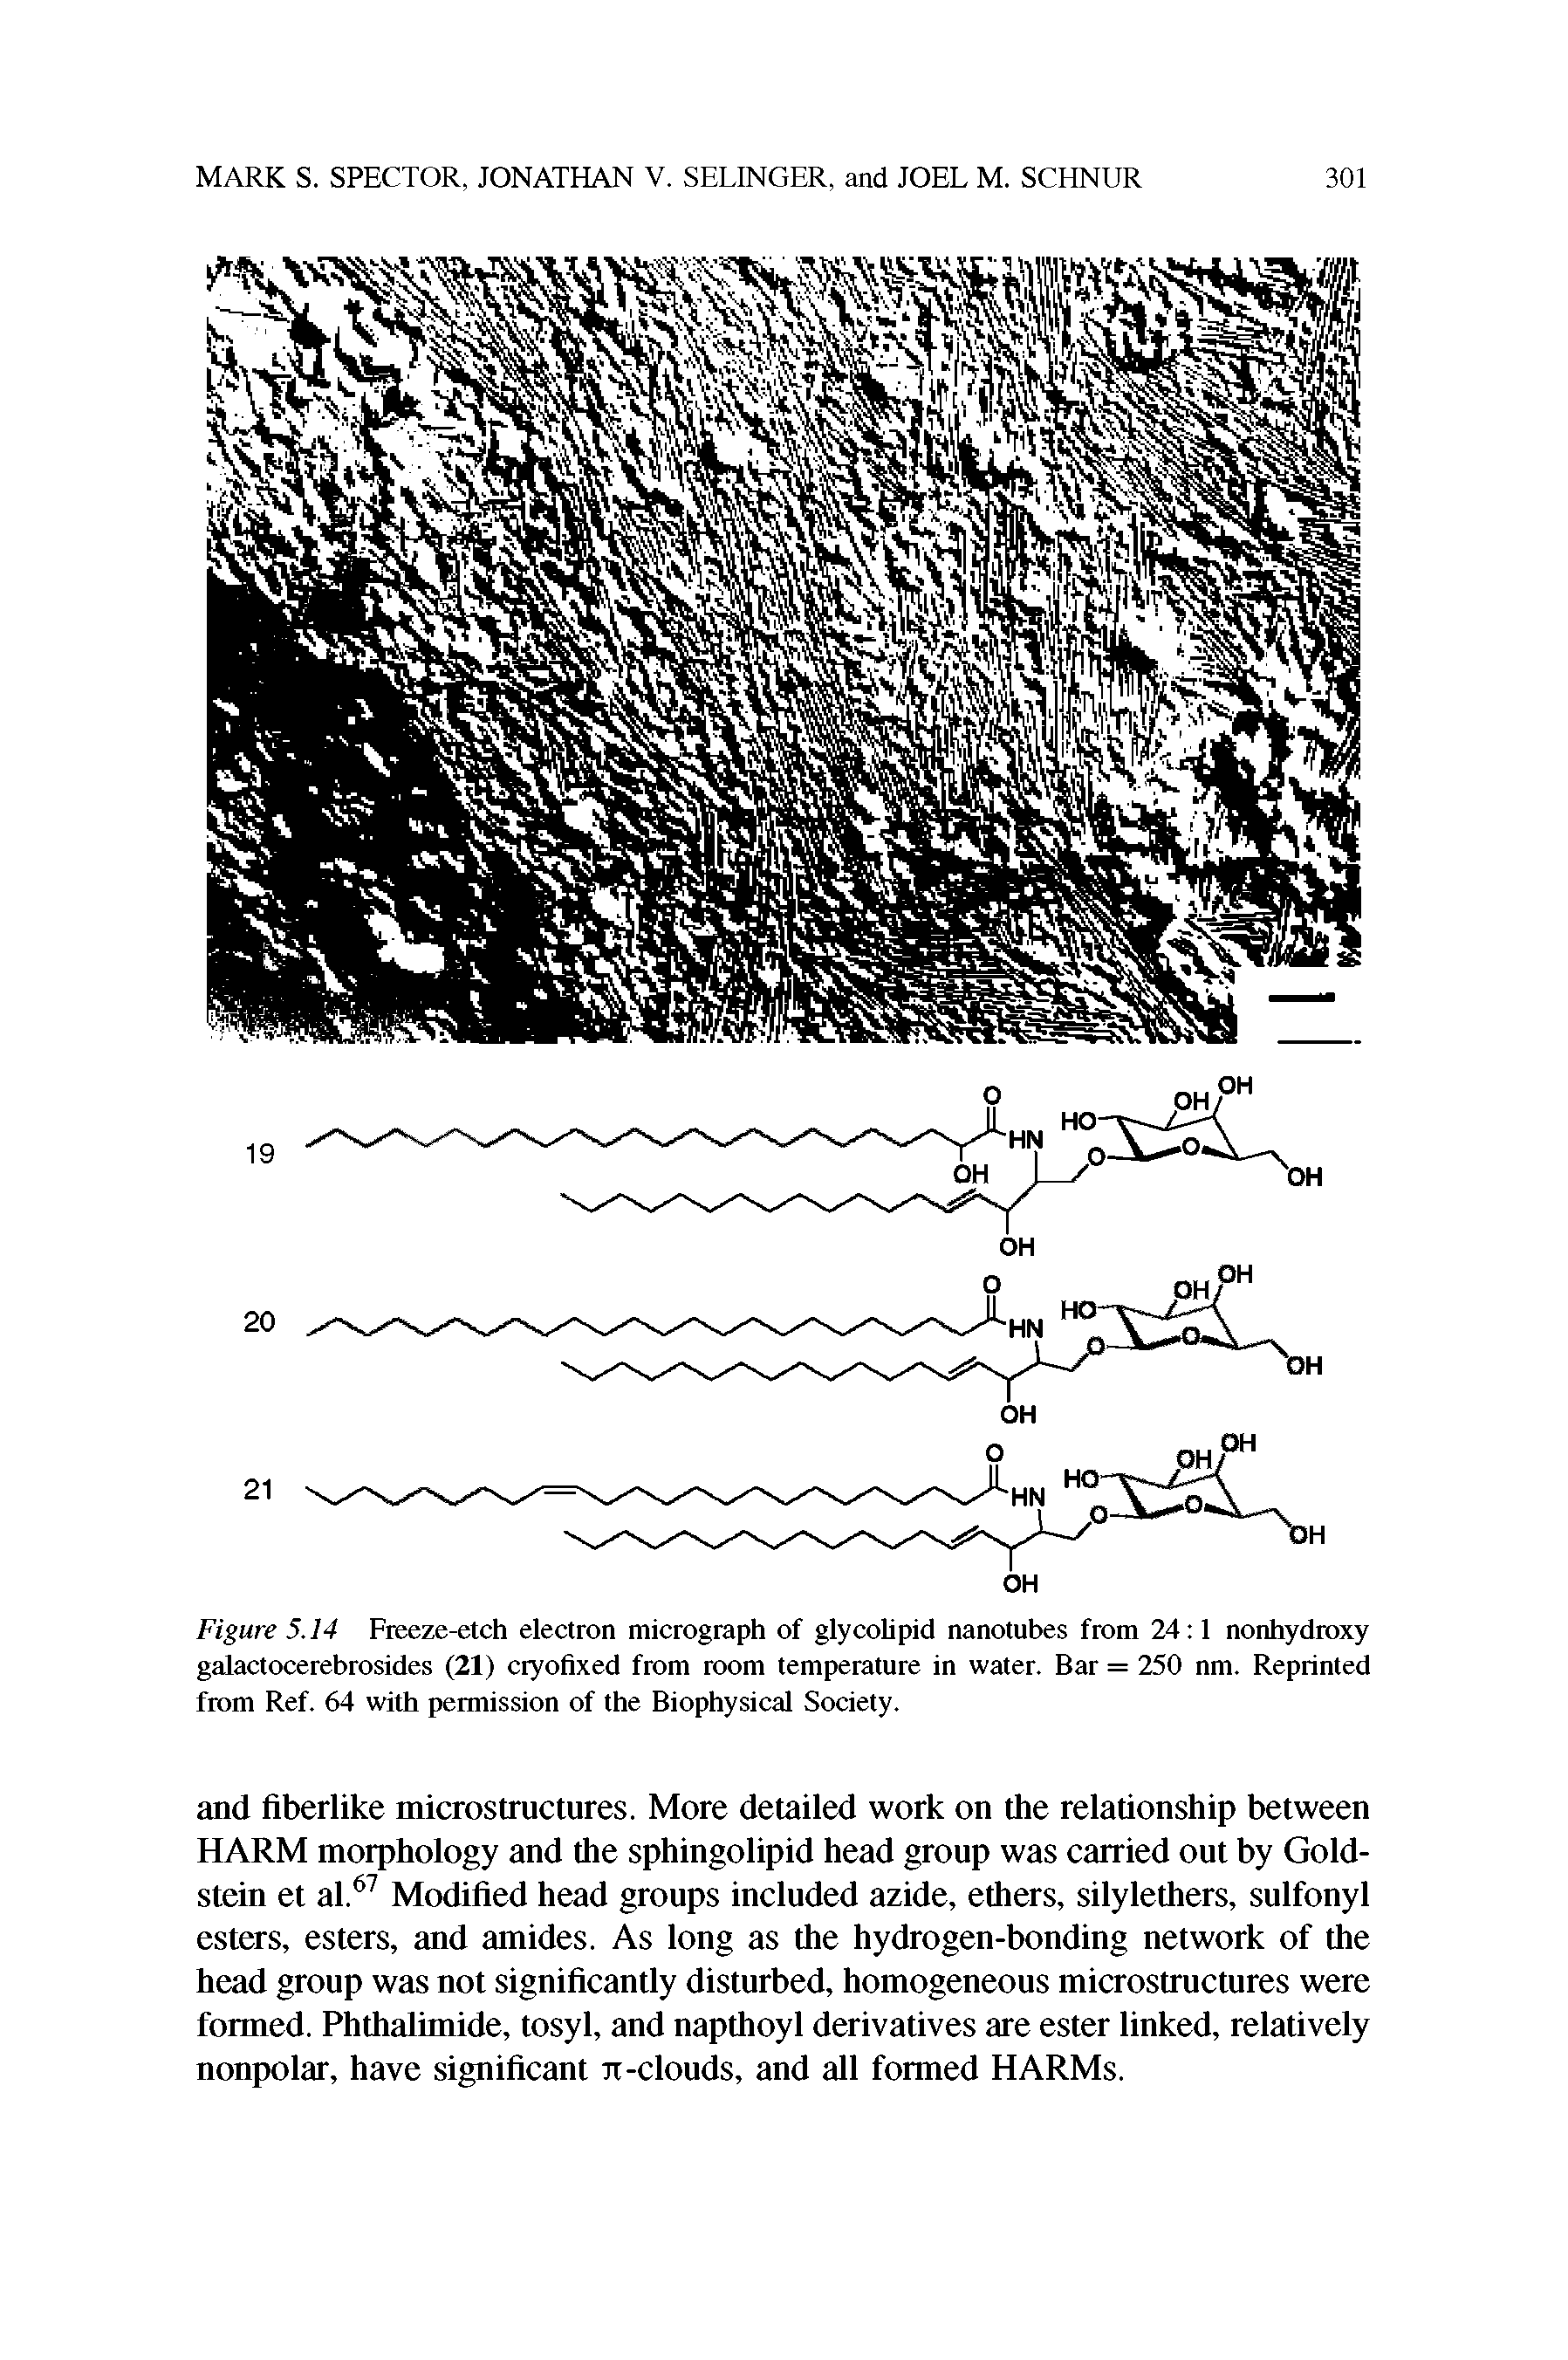 Figure 5.14 Freeze-etch electron micrograph of glycolipid nanotubes from 24 1 nonhydroxy galactocerebrosides (21) cryofixed from room temperature in water. Bar = 250 nm. Reprinted from Ref. 64 with permission of the Biophysical Society.